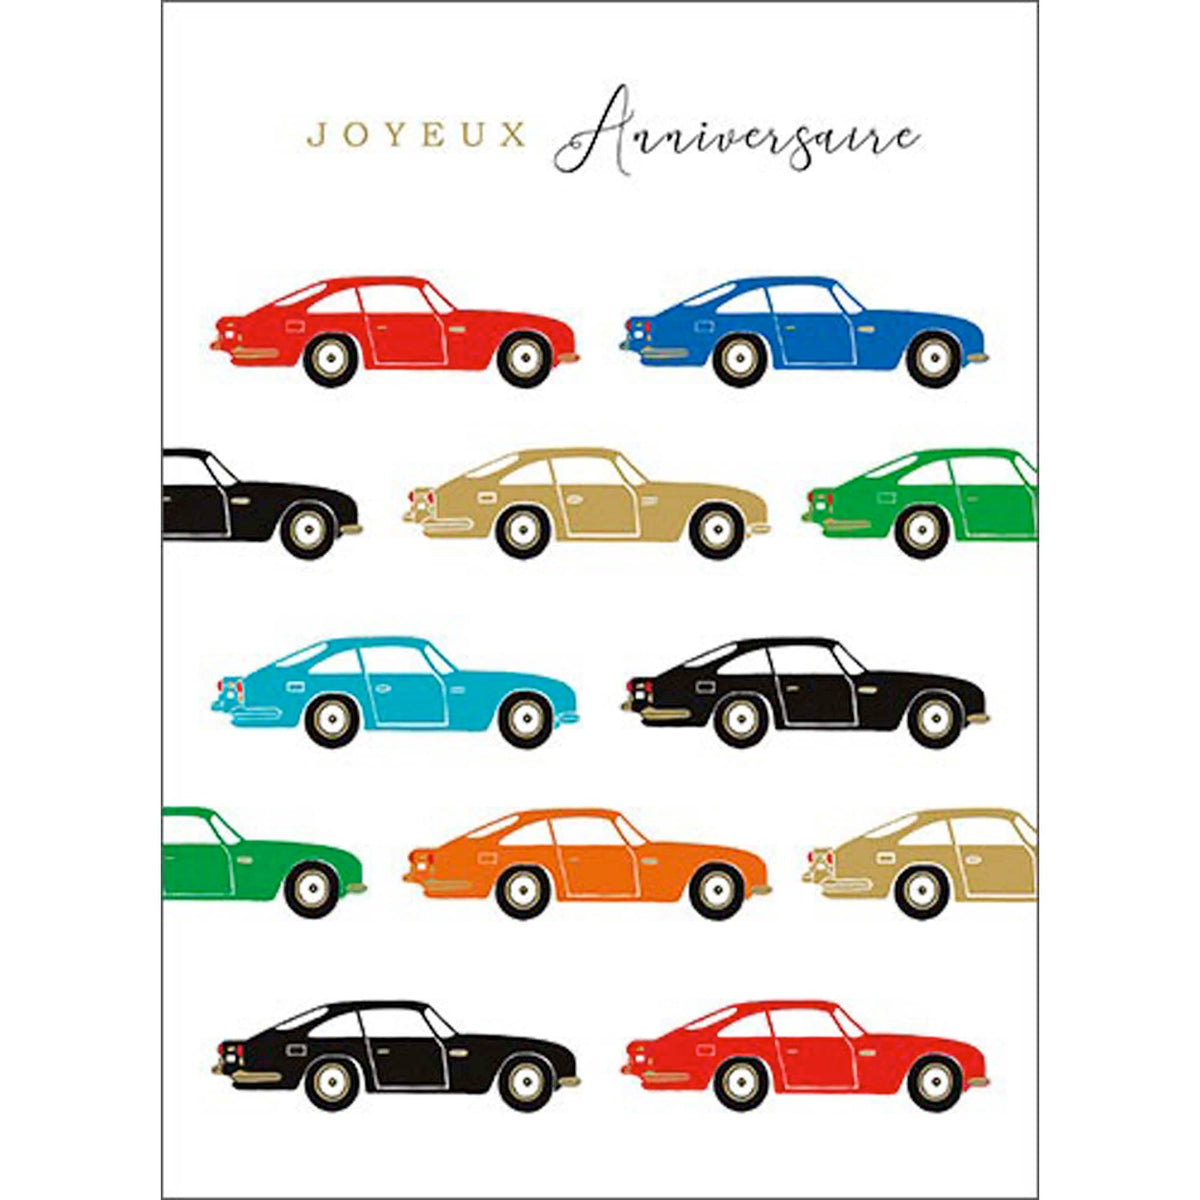 DISTRIBUTION INCOGNITO Greeting Cards Giant Birthday Card, "Joyeux Anniversaire" Cars, 1 Count 3700572767796